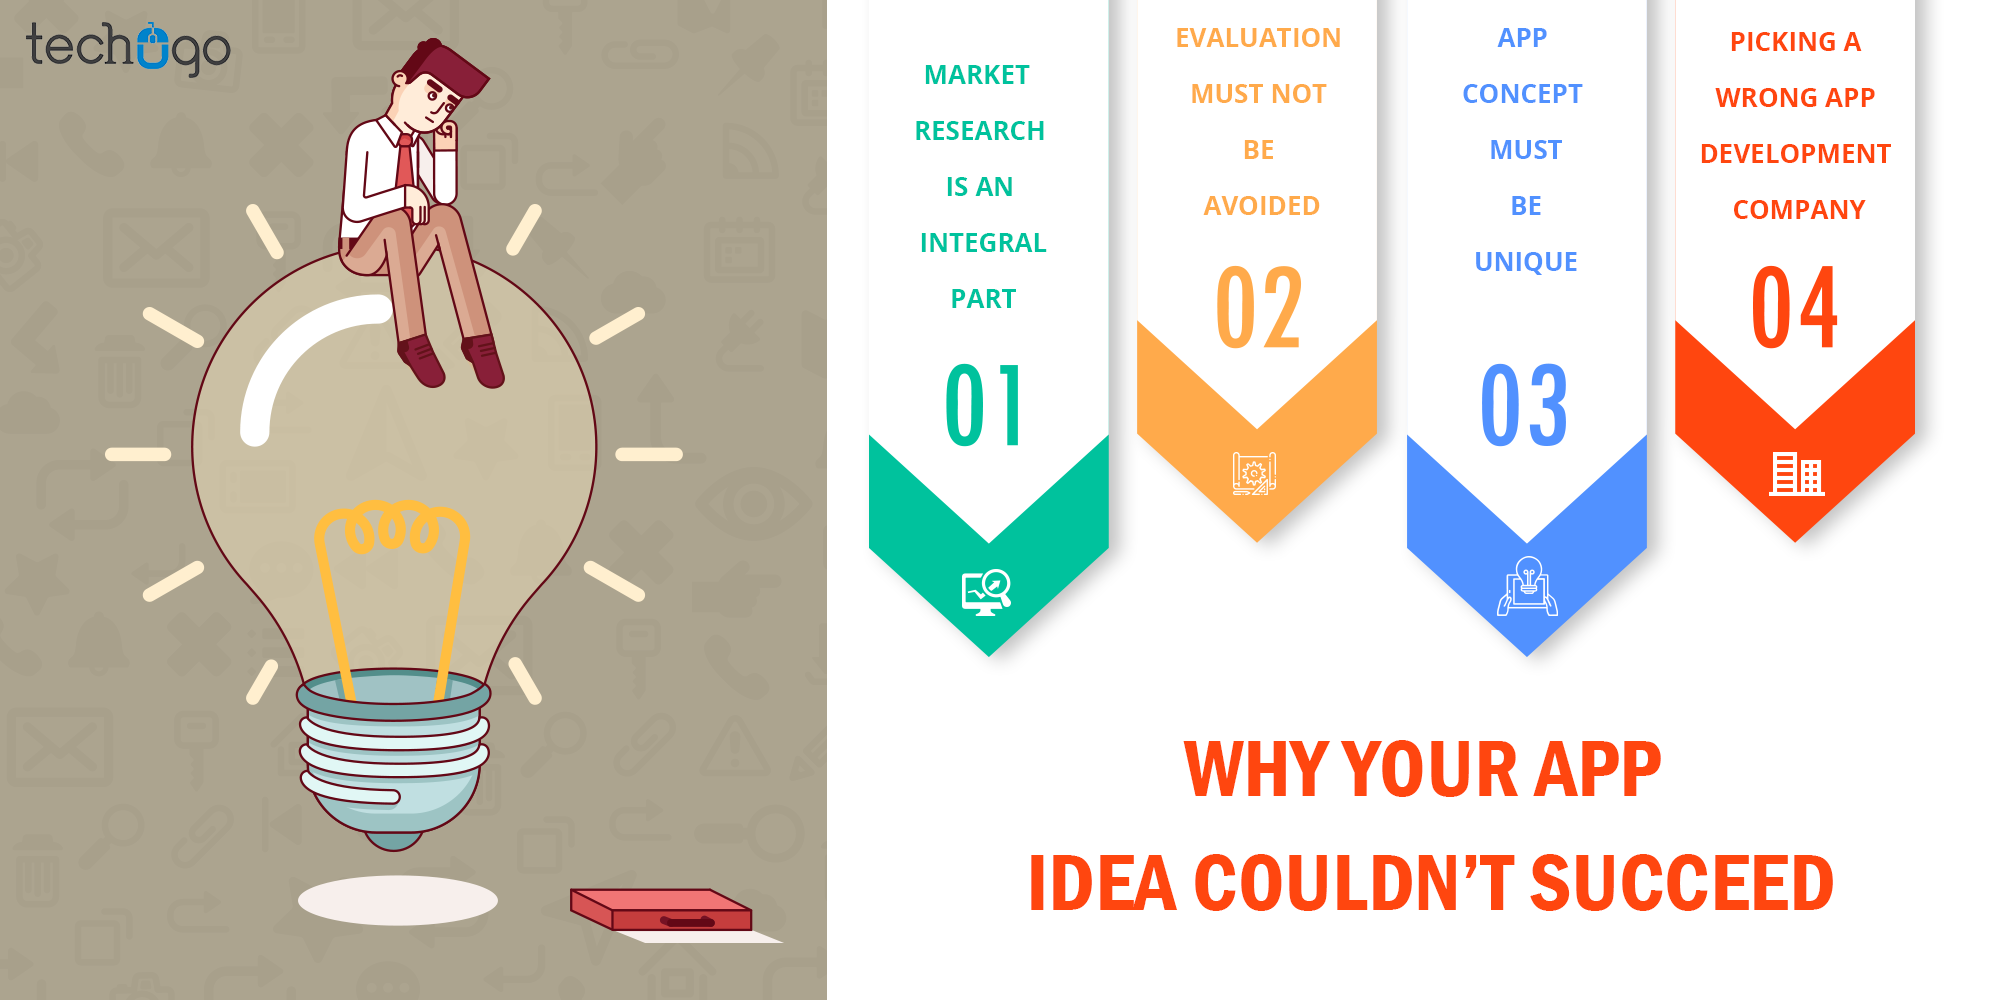 WHY YOUR APP IDEA COULDN’T SUCCEED